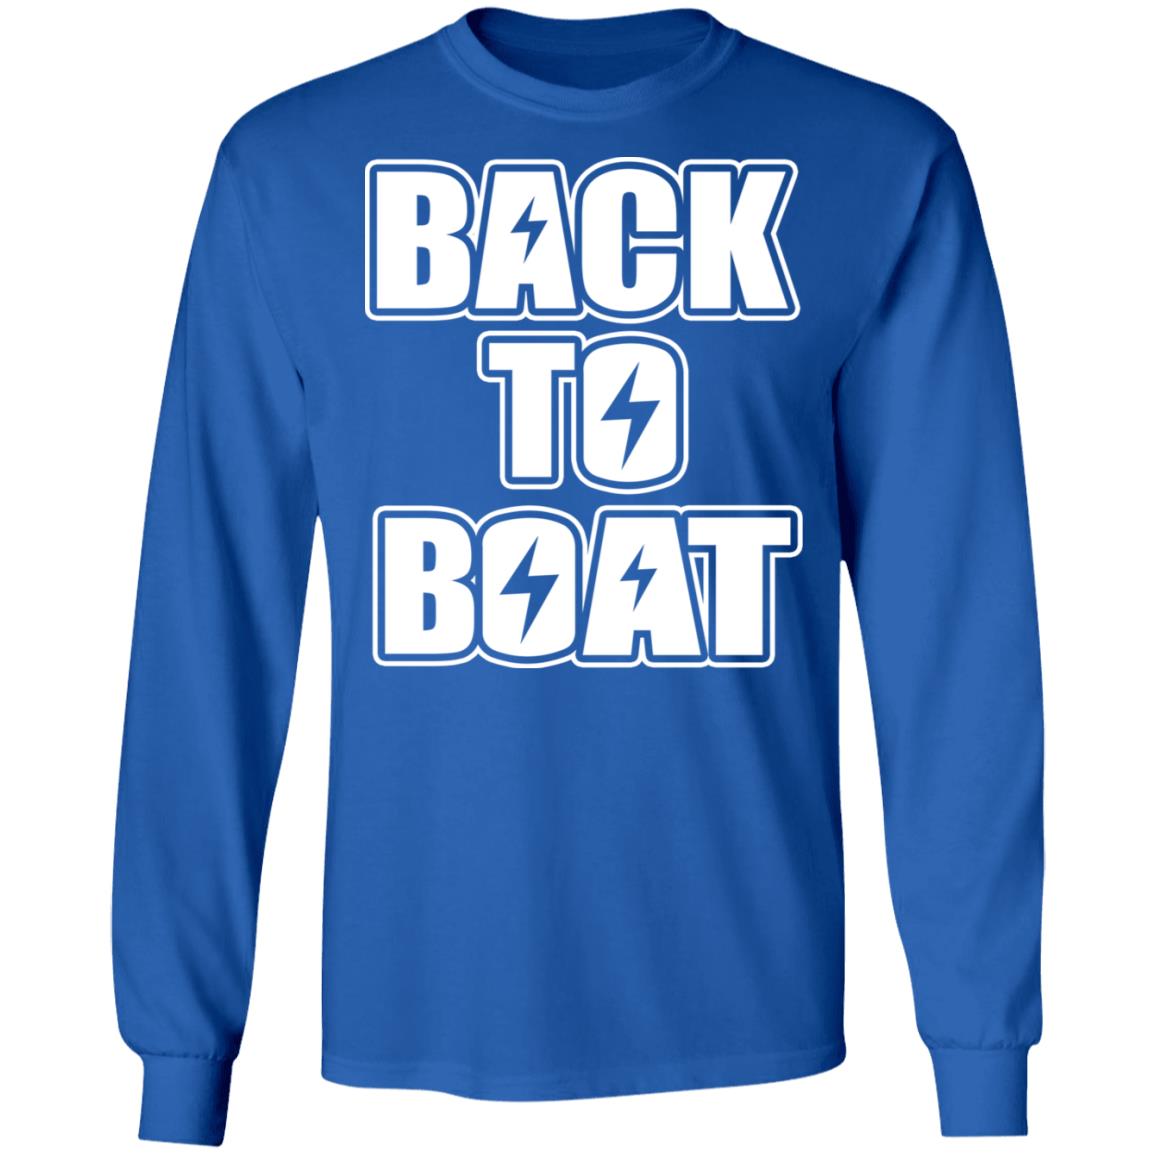 Back To Boat Shirt | Teemoonley.com